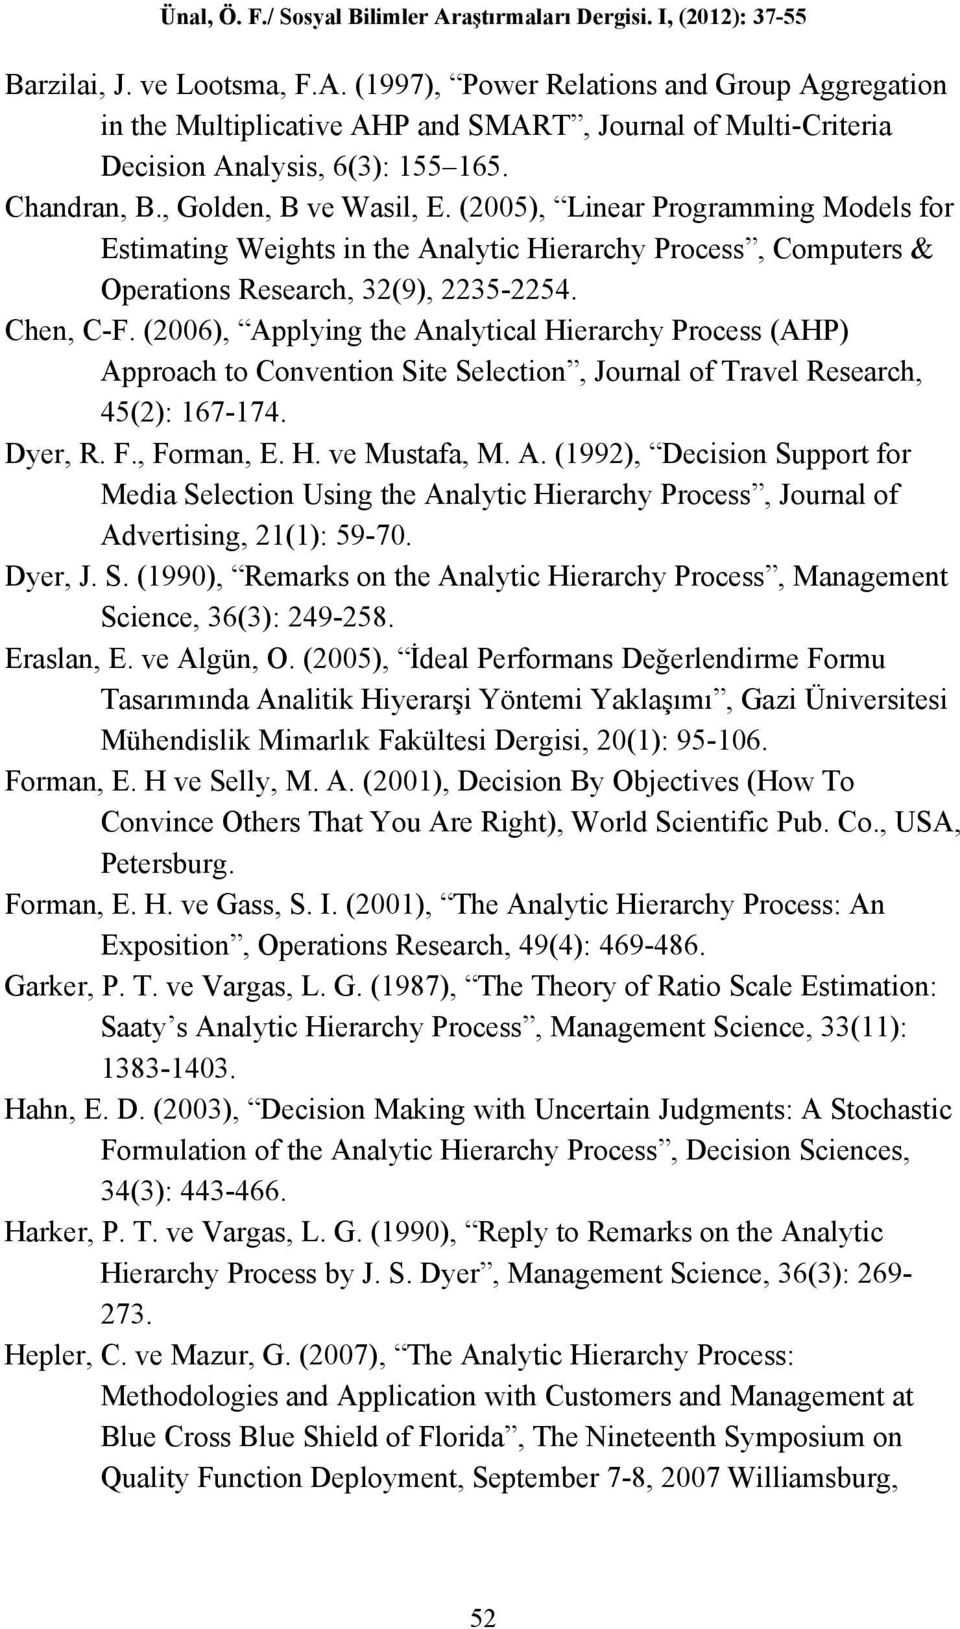 (2006), Applying the Analytical Hierarchy Process (AHP) Approach to Convention Site Selection, Journal of Travel Research, 45(2): 167-174. Dyer, R. F., Forman, E. H. ve Mustafa, M. A. (1992), Decision Support for Media Selection Using the Analytic Hierarchy Process, Journal of Advertising, 21(1): 59-70.